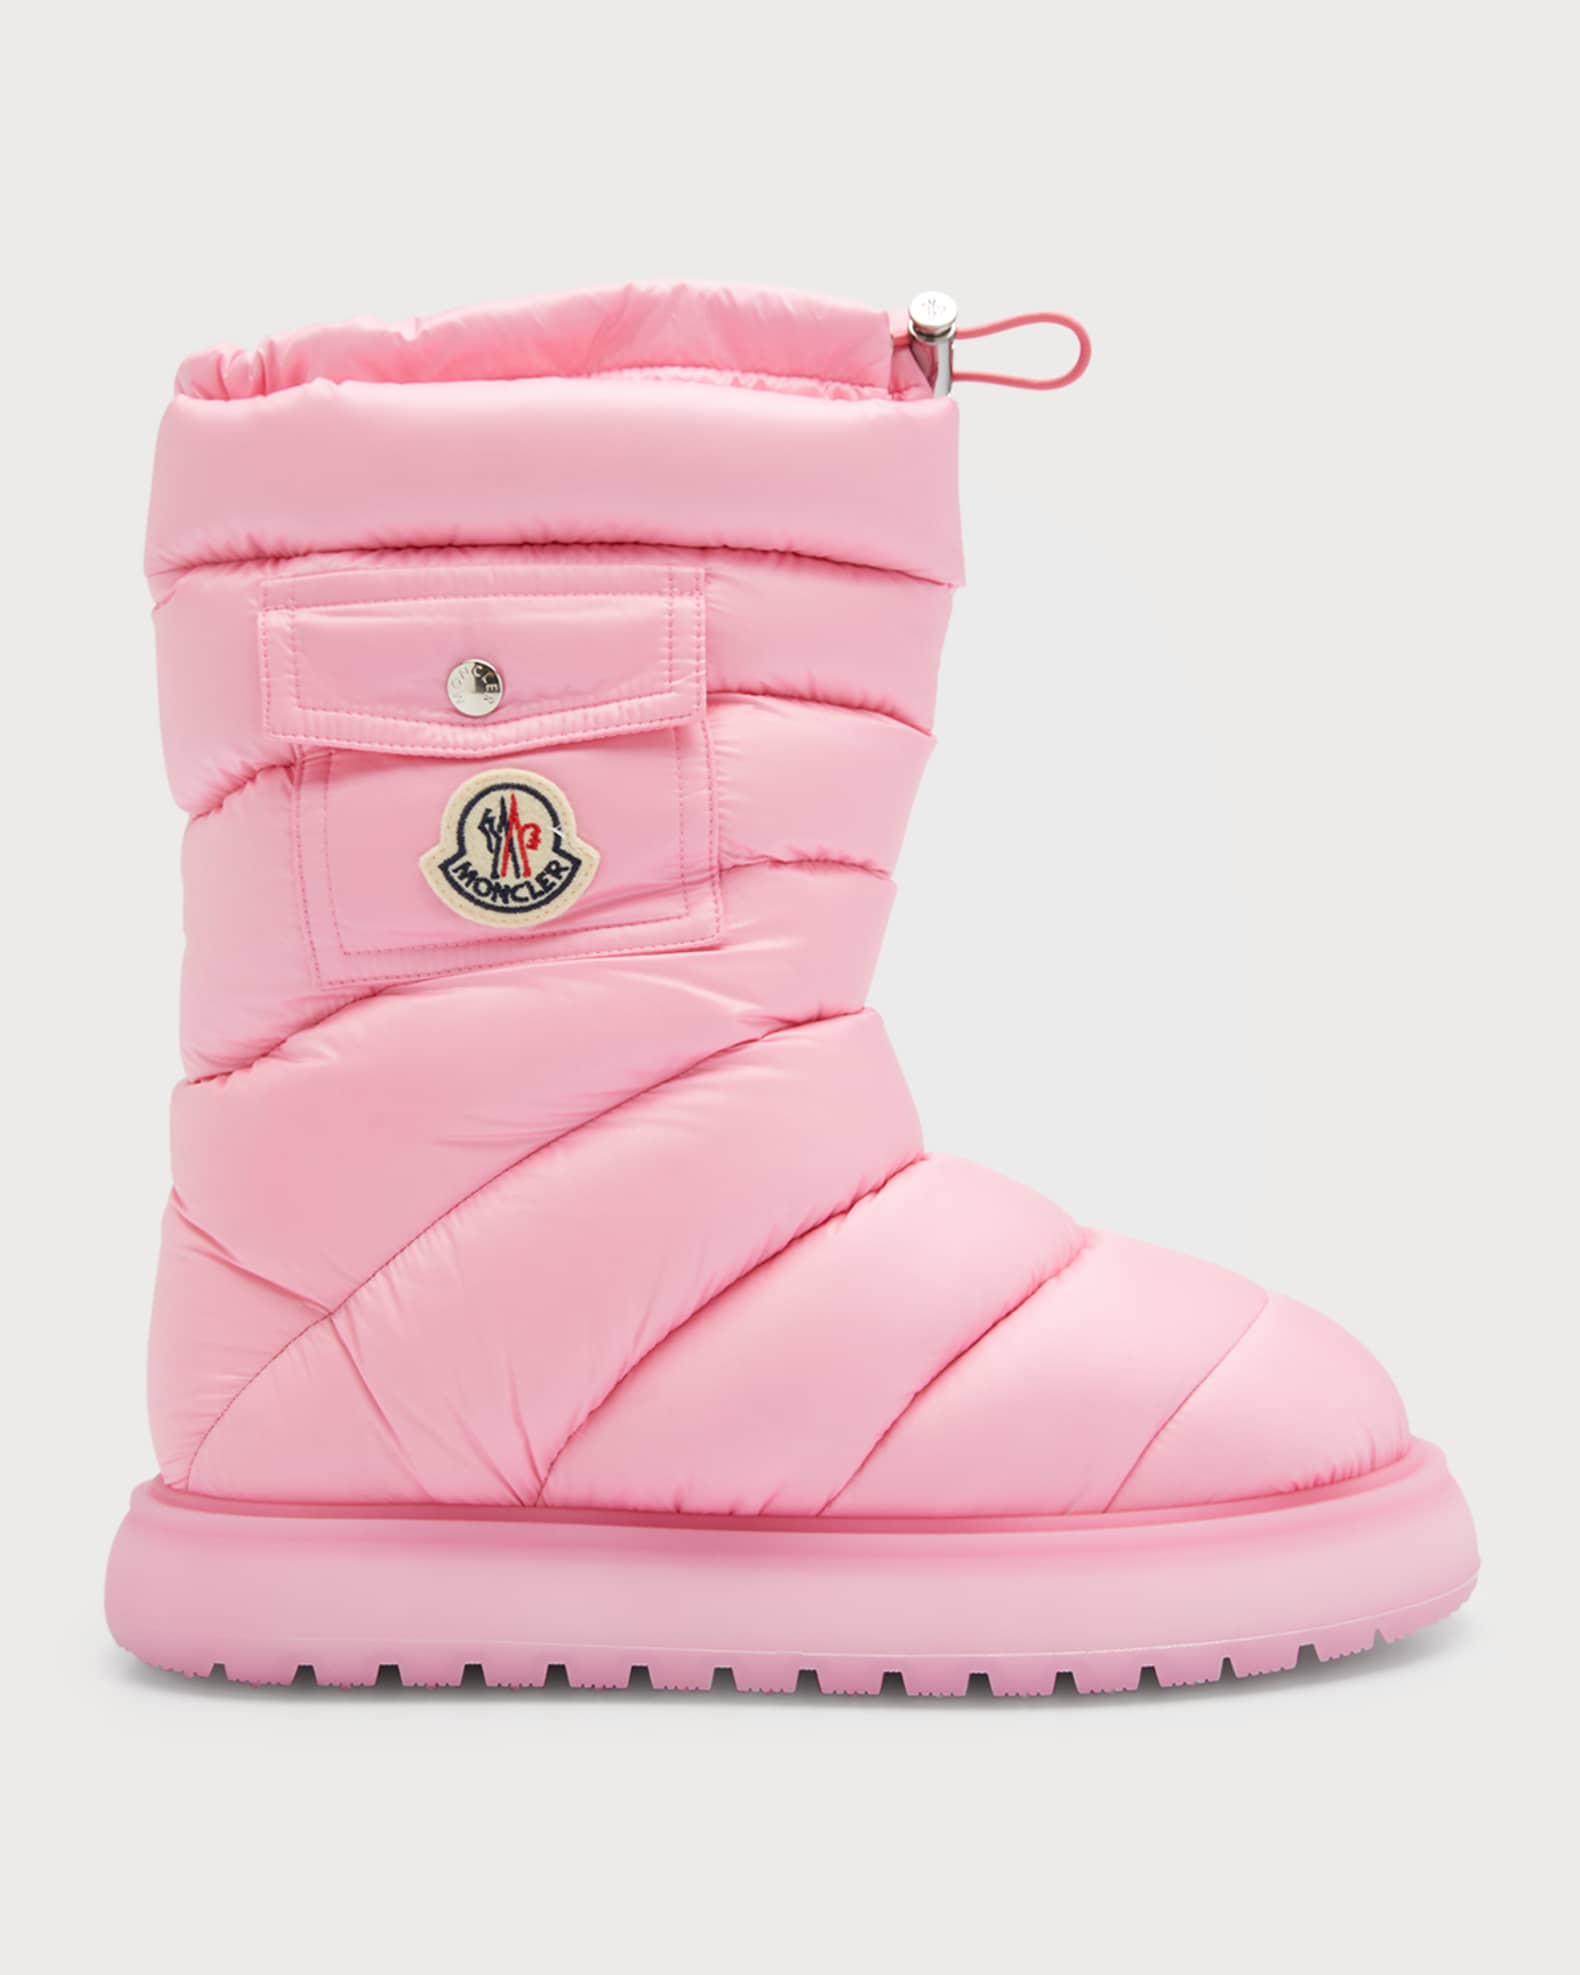 Moncler Gaia Quilted Nylon Pocket Snow Boots | Neiman Marcus